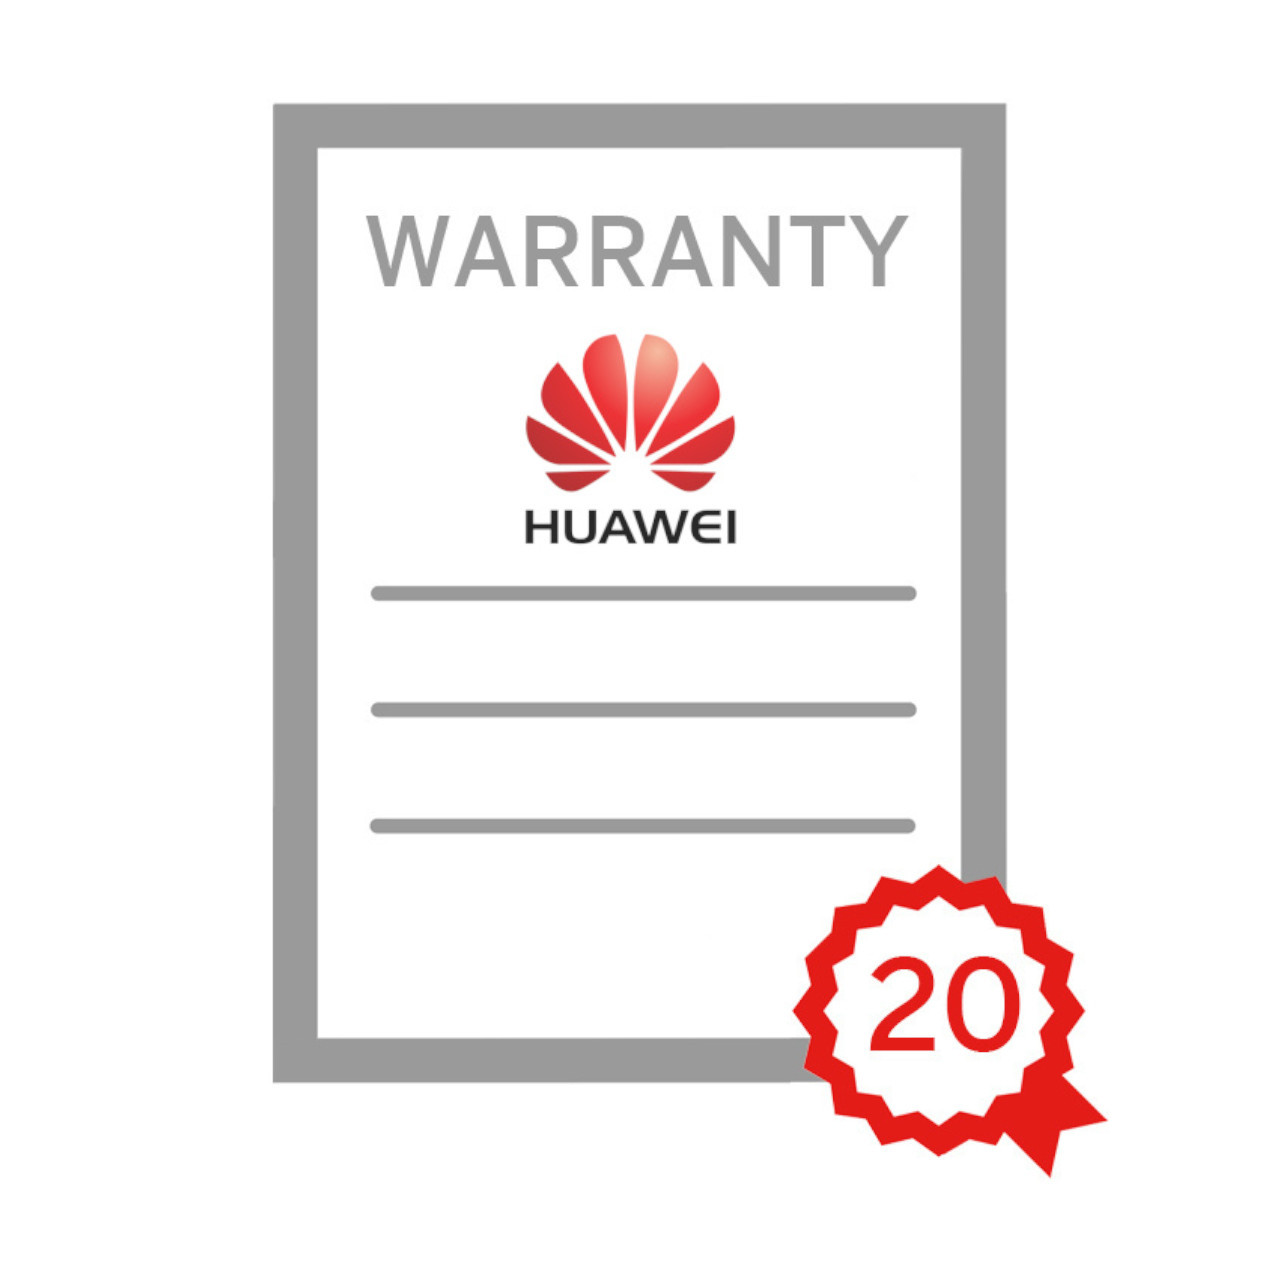 Huawei - 3.8KTL Warranty Extension to 20yrs